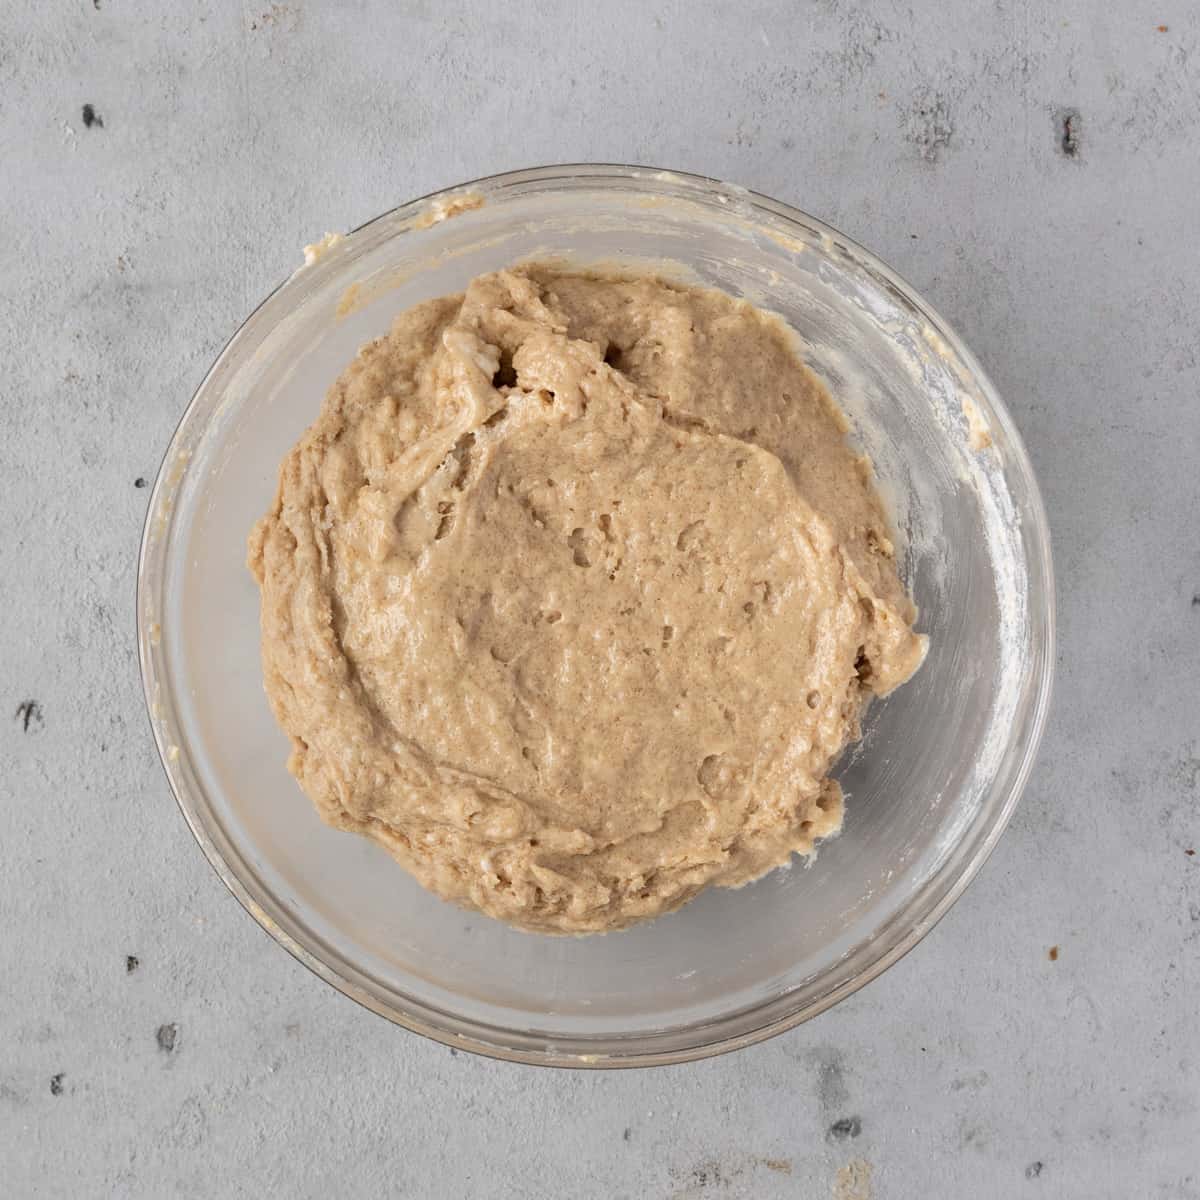 the wet and dry ingredients combined into the completed donut batter in a glass bowl on a grey background